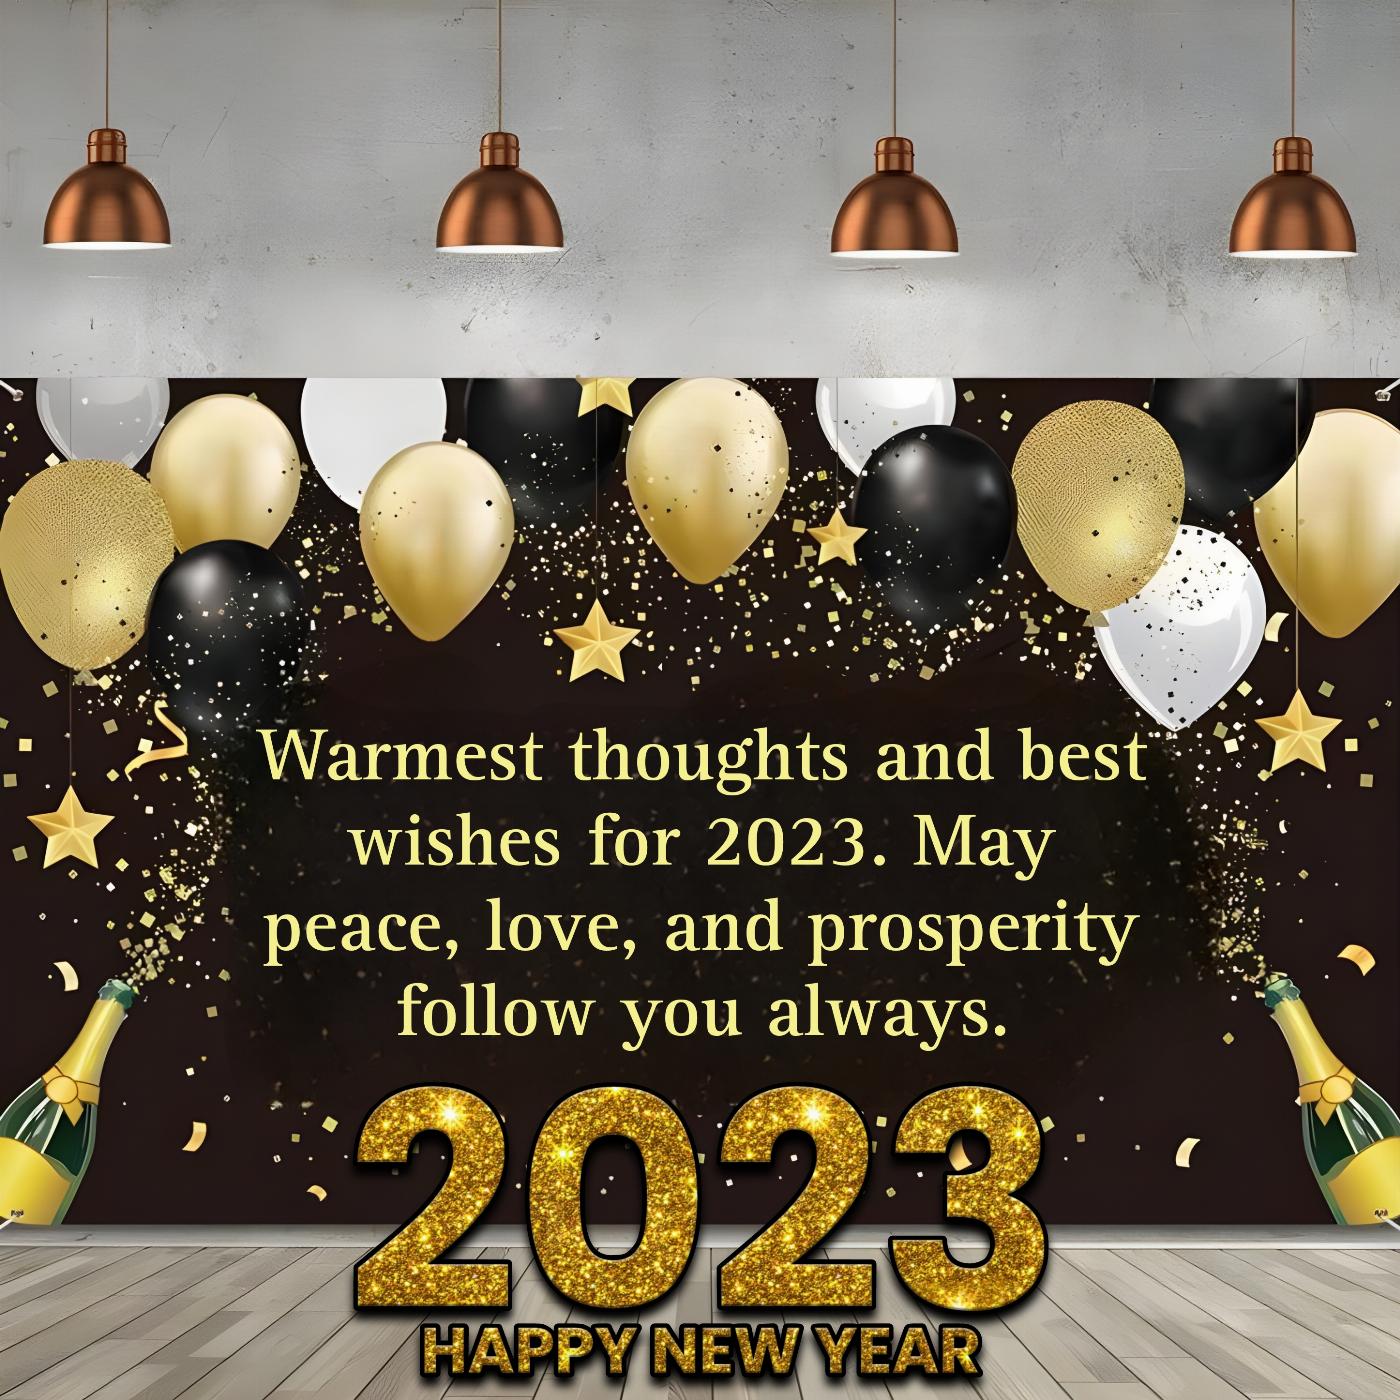 Warmest thoughts and best wishes for 2023